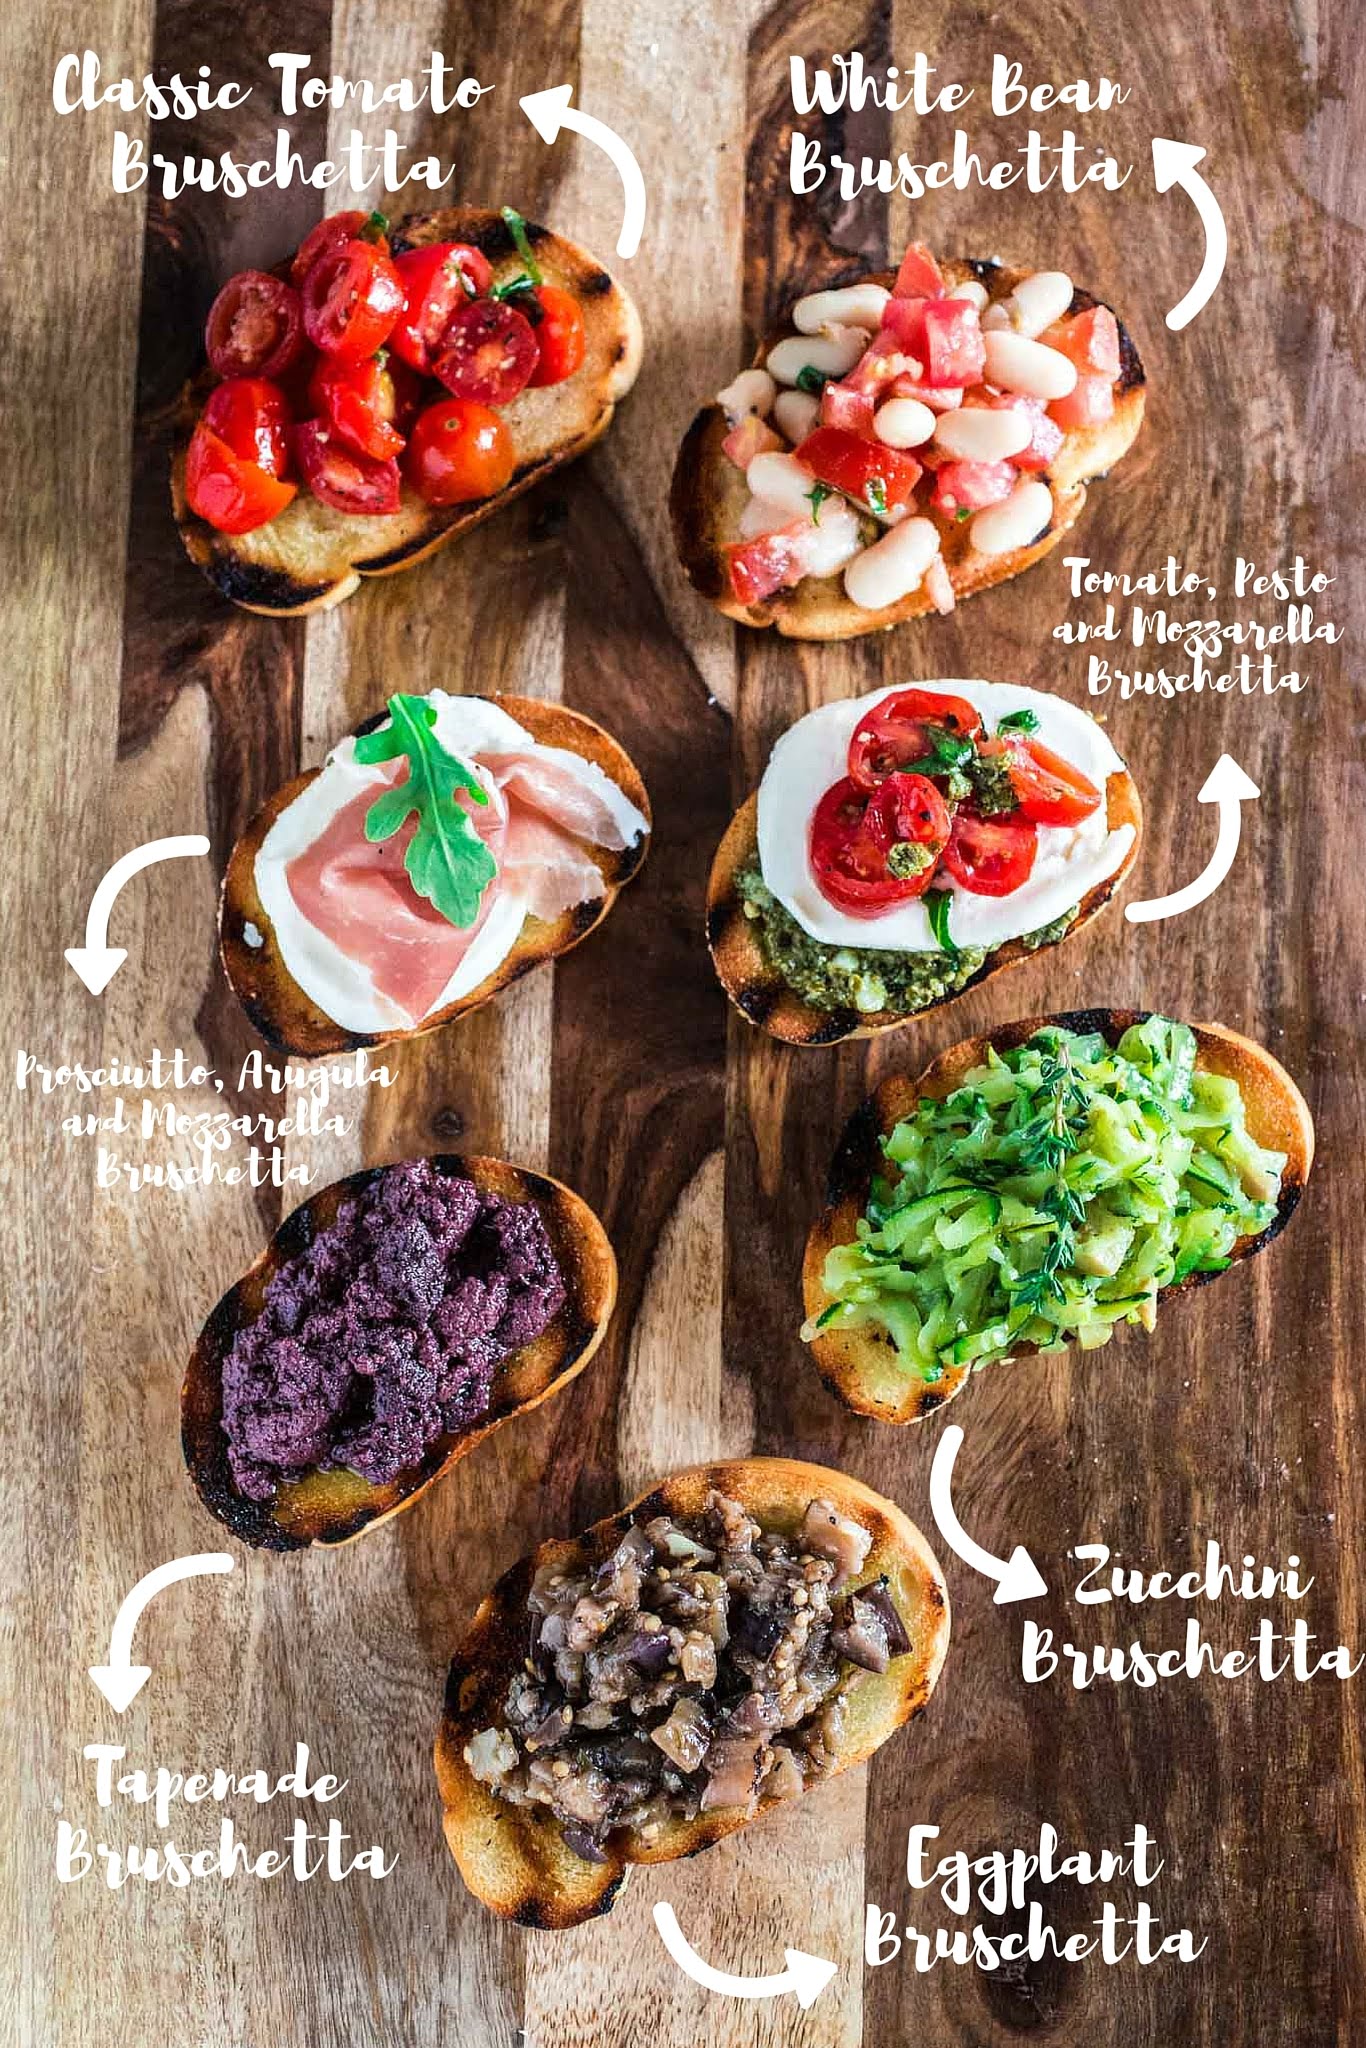 Build Your Own Bruschetta Bar | www.oliviascuisine.com | A step by step tutorial so you can set up a beautiful and fun bruschetta station for your next party!